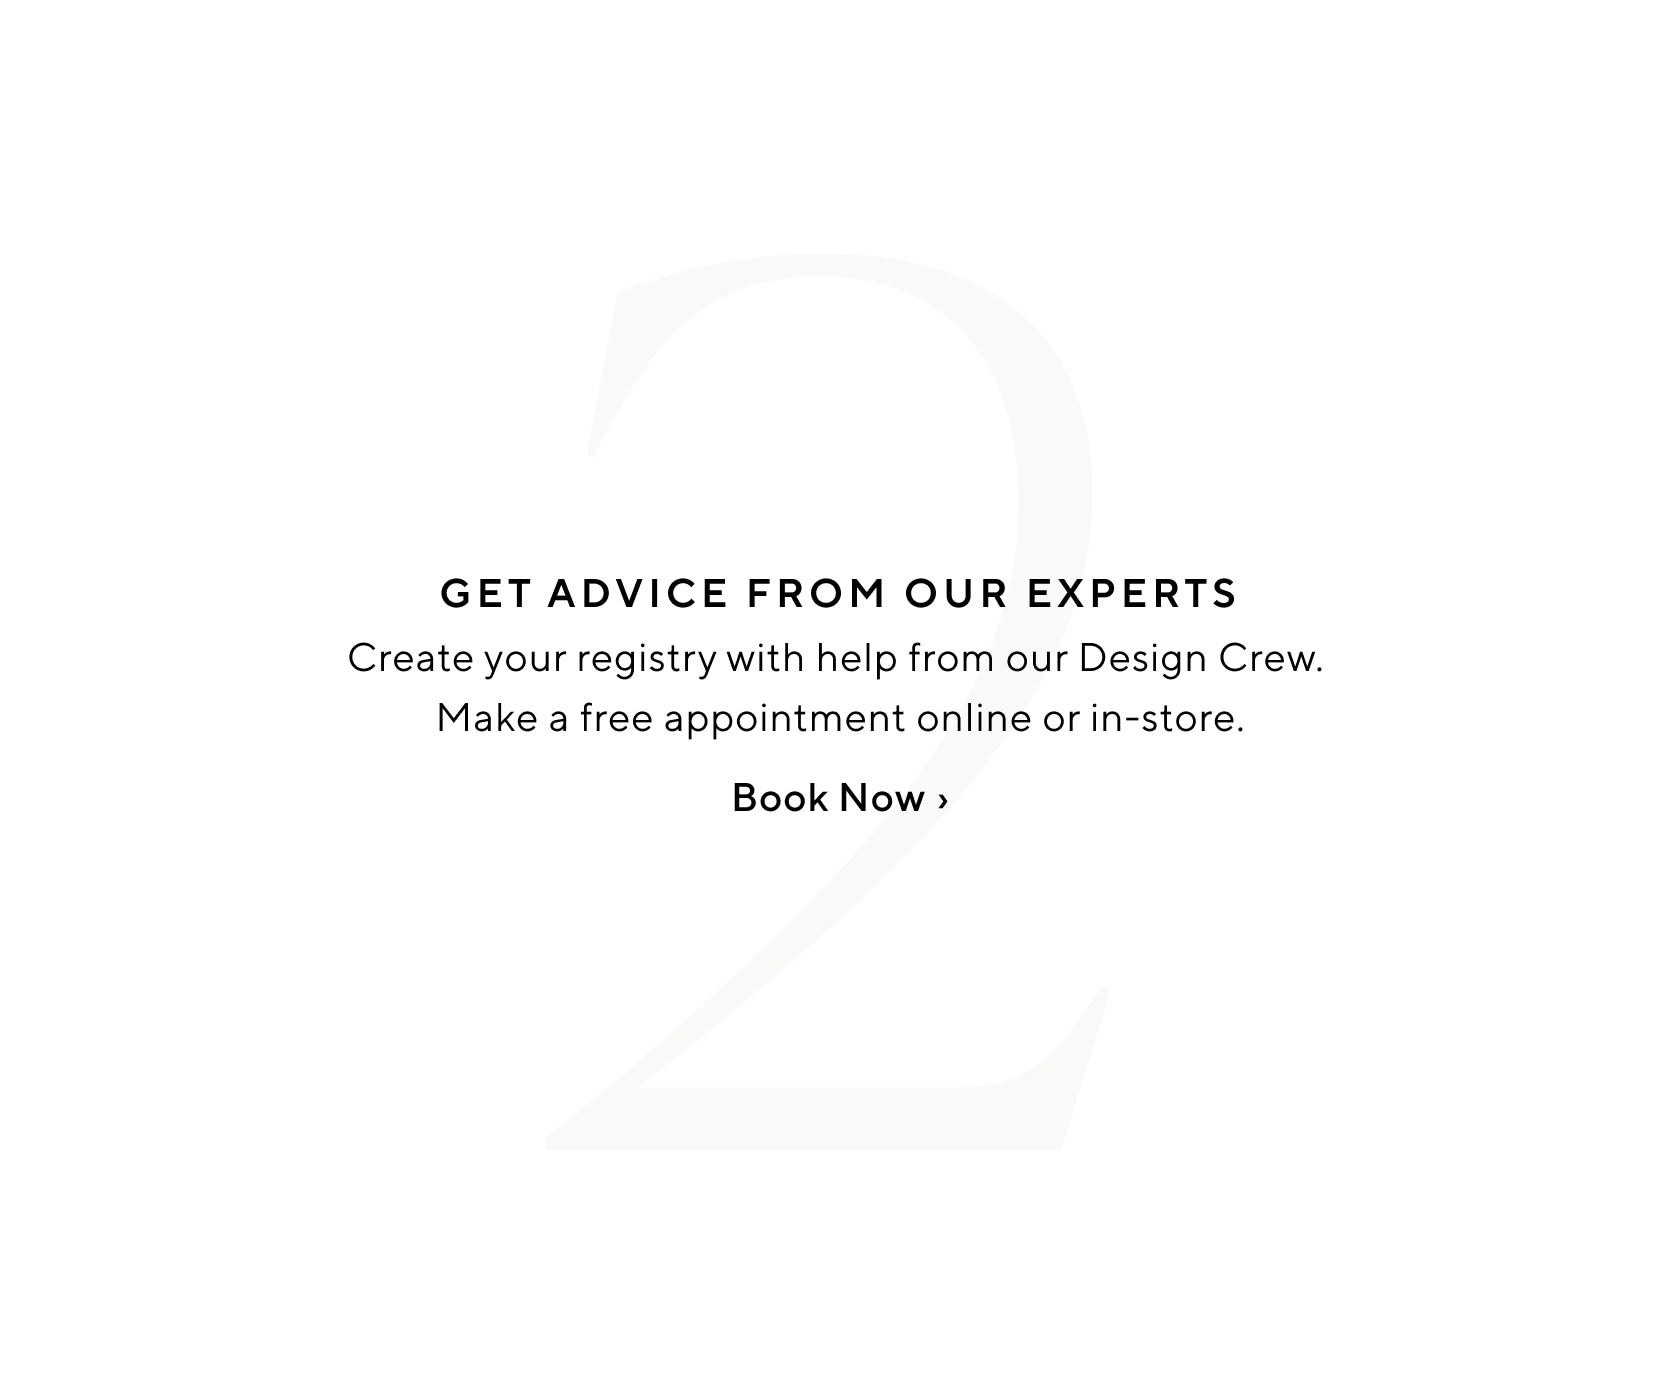 Get Advice From Our Experts